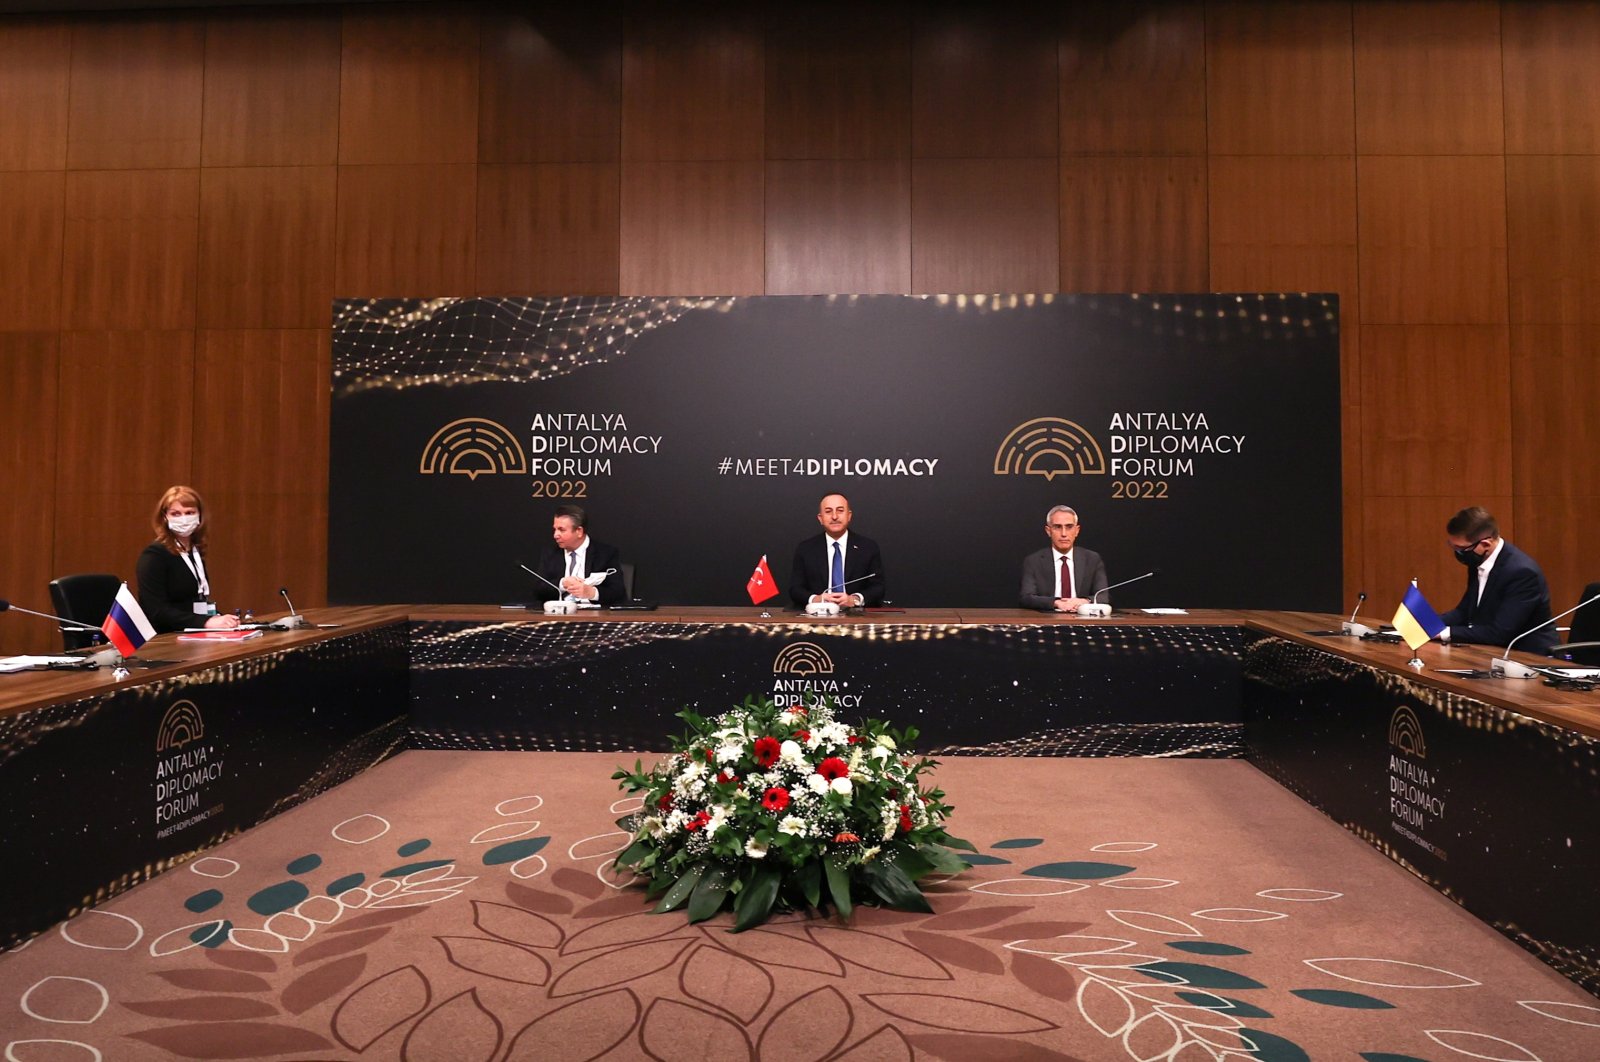 A handout photo made available by the press service of the Turkish Foreign Affairs Ministry shows Russian Foreign Minister Sergey Lavrov (L), Turkish Foreign Minister Mevlüt Çavuşoğlu (C) and Ukranian Foreign Minister Dmytro Kuleba (R) posing before their meeting during the Antalya Diplomacy Forum in Antalya, Turkey, 10 March 2022. (EPA)